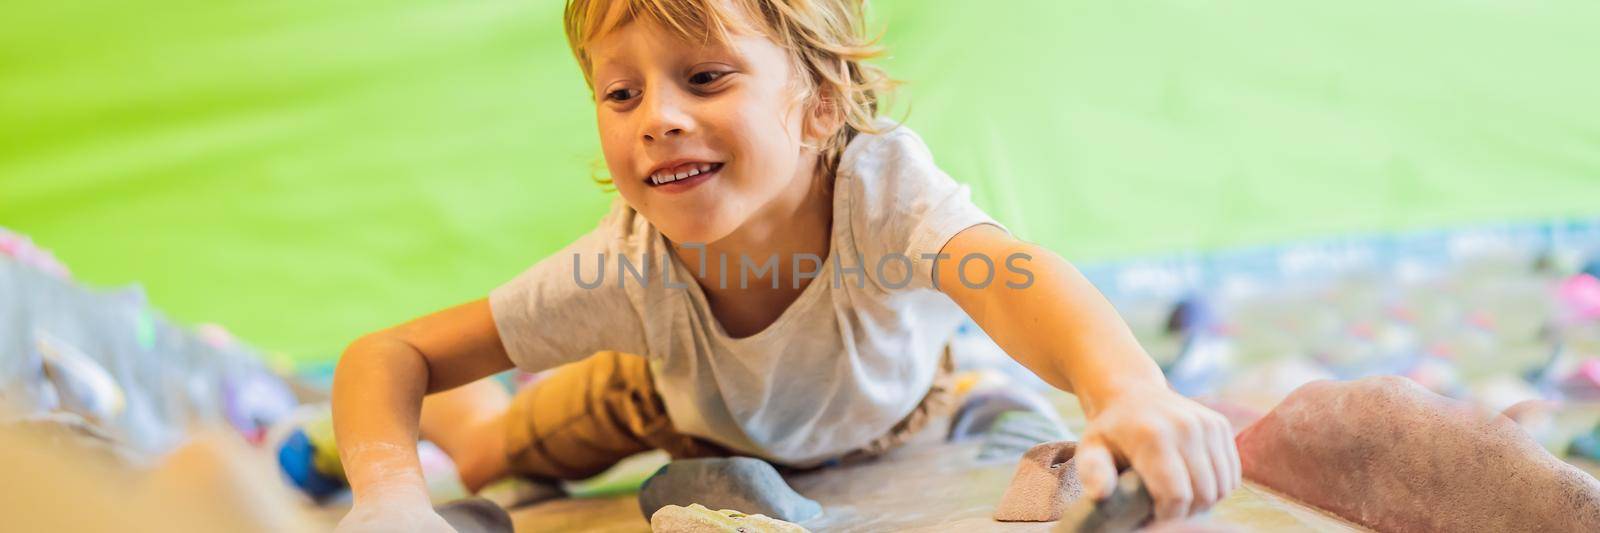 little boy climbing a rock wall in special boots. indoor. BANNER, LONG FORMAT